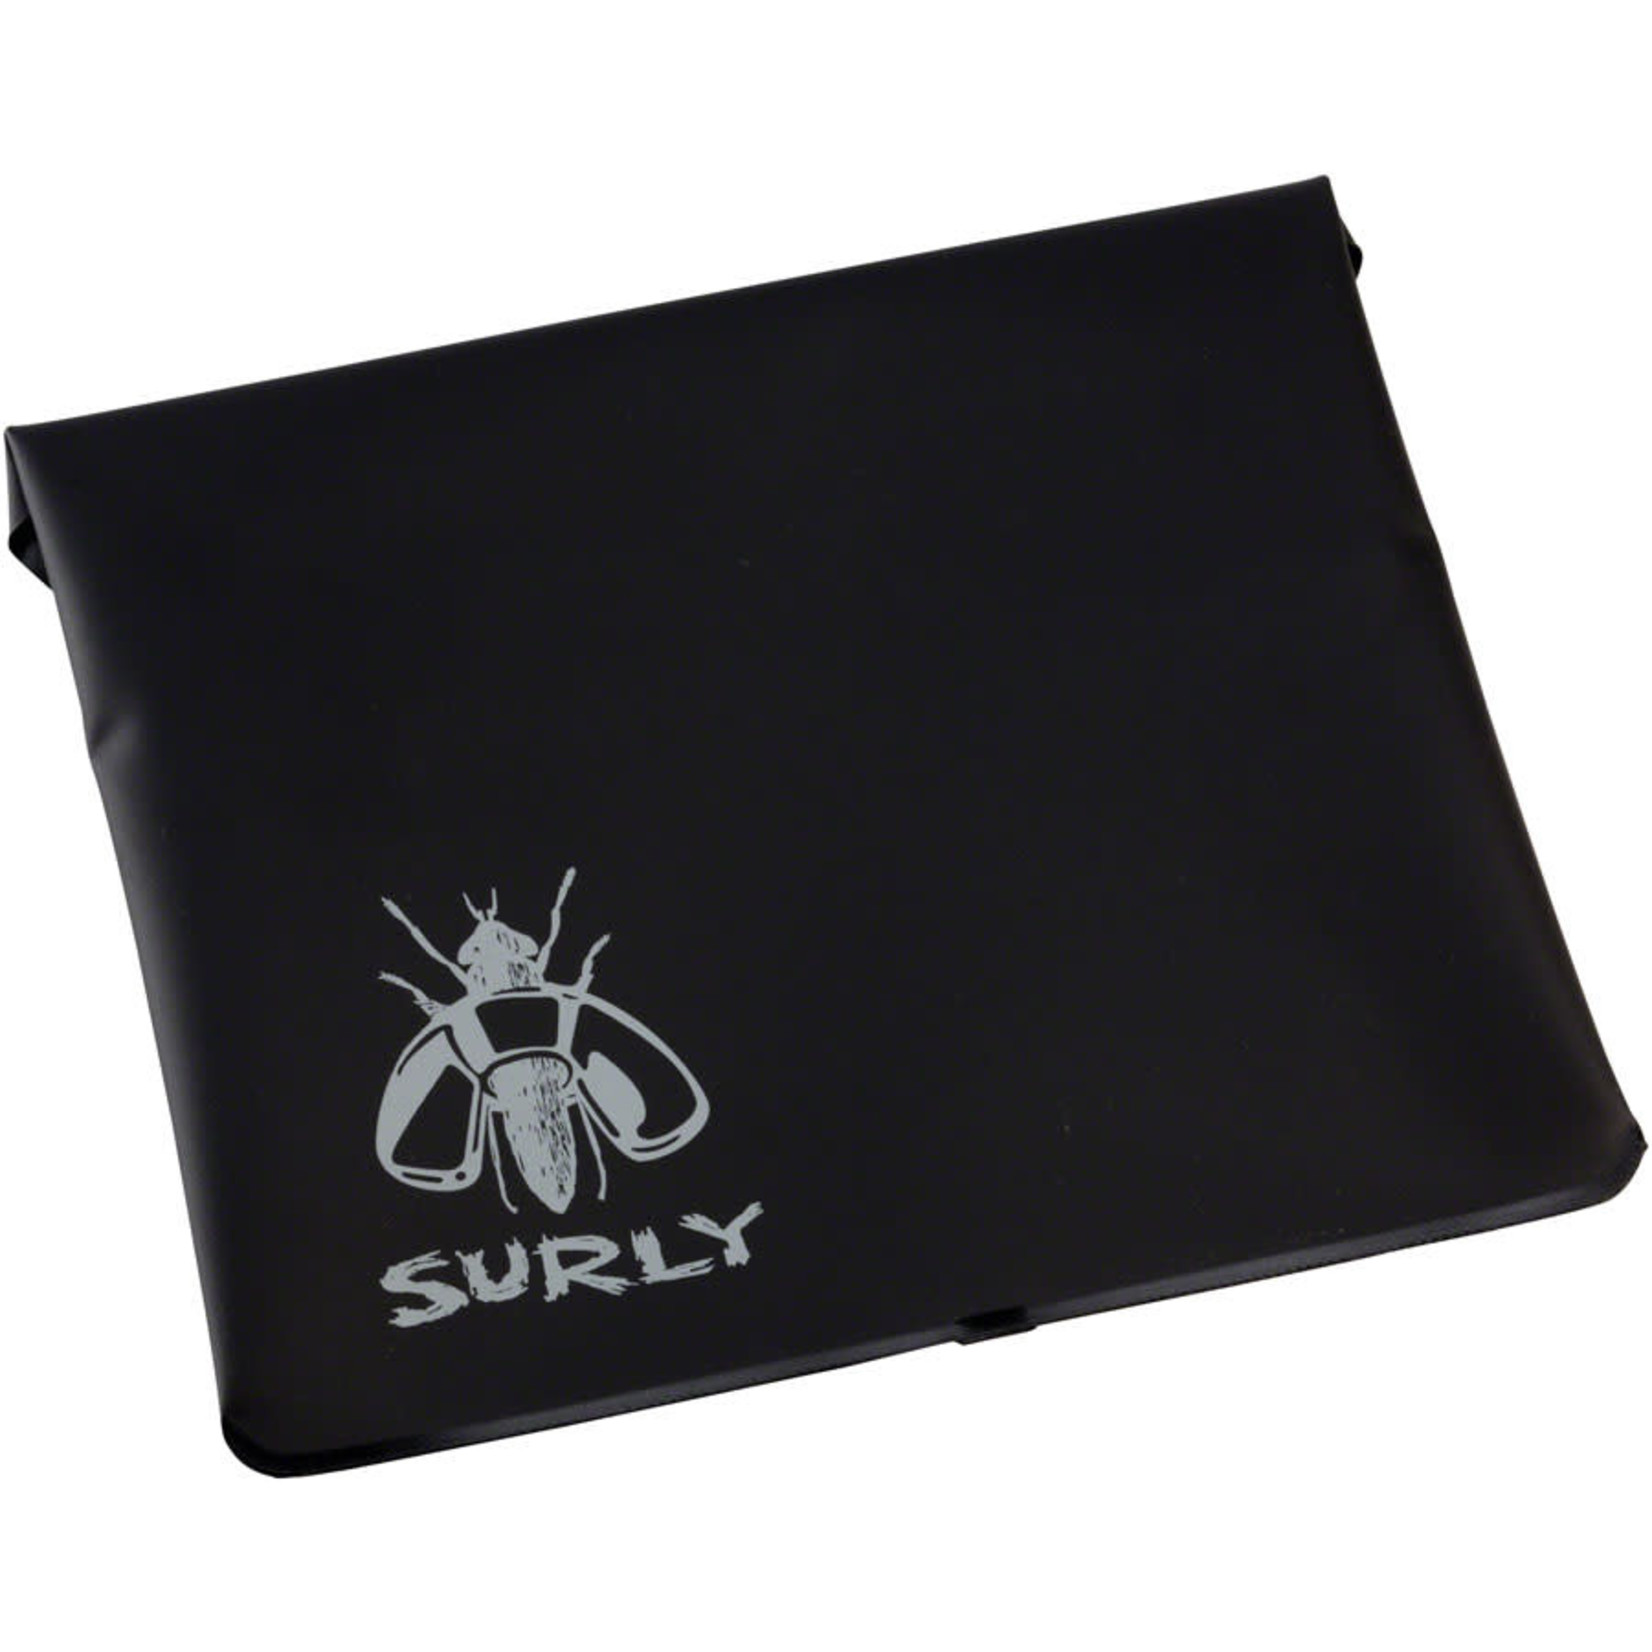 Surly Surly Tool Bag